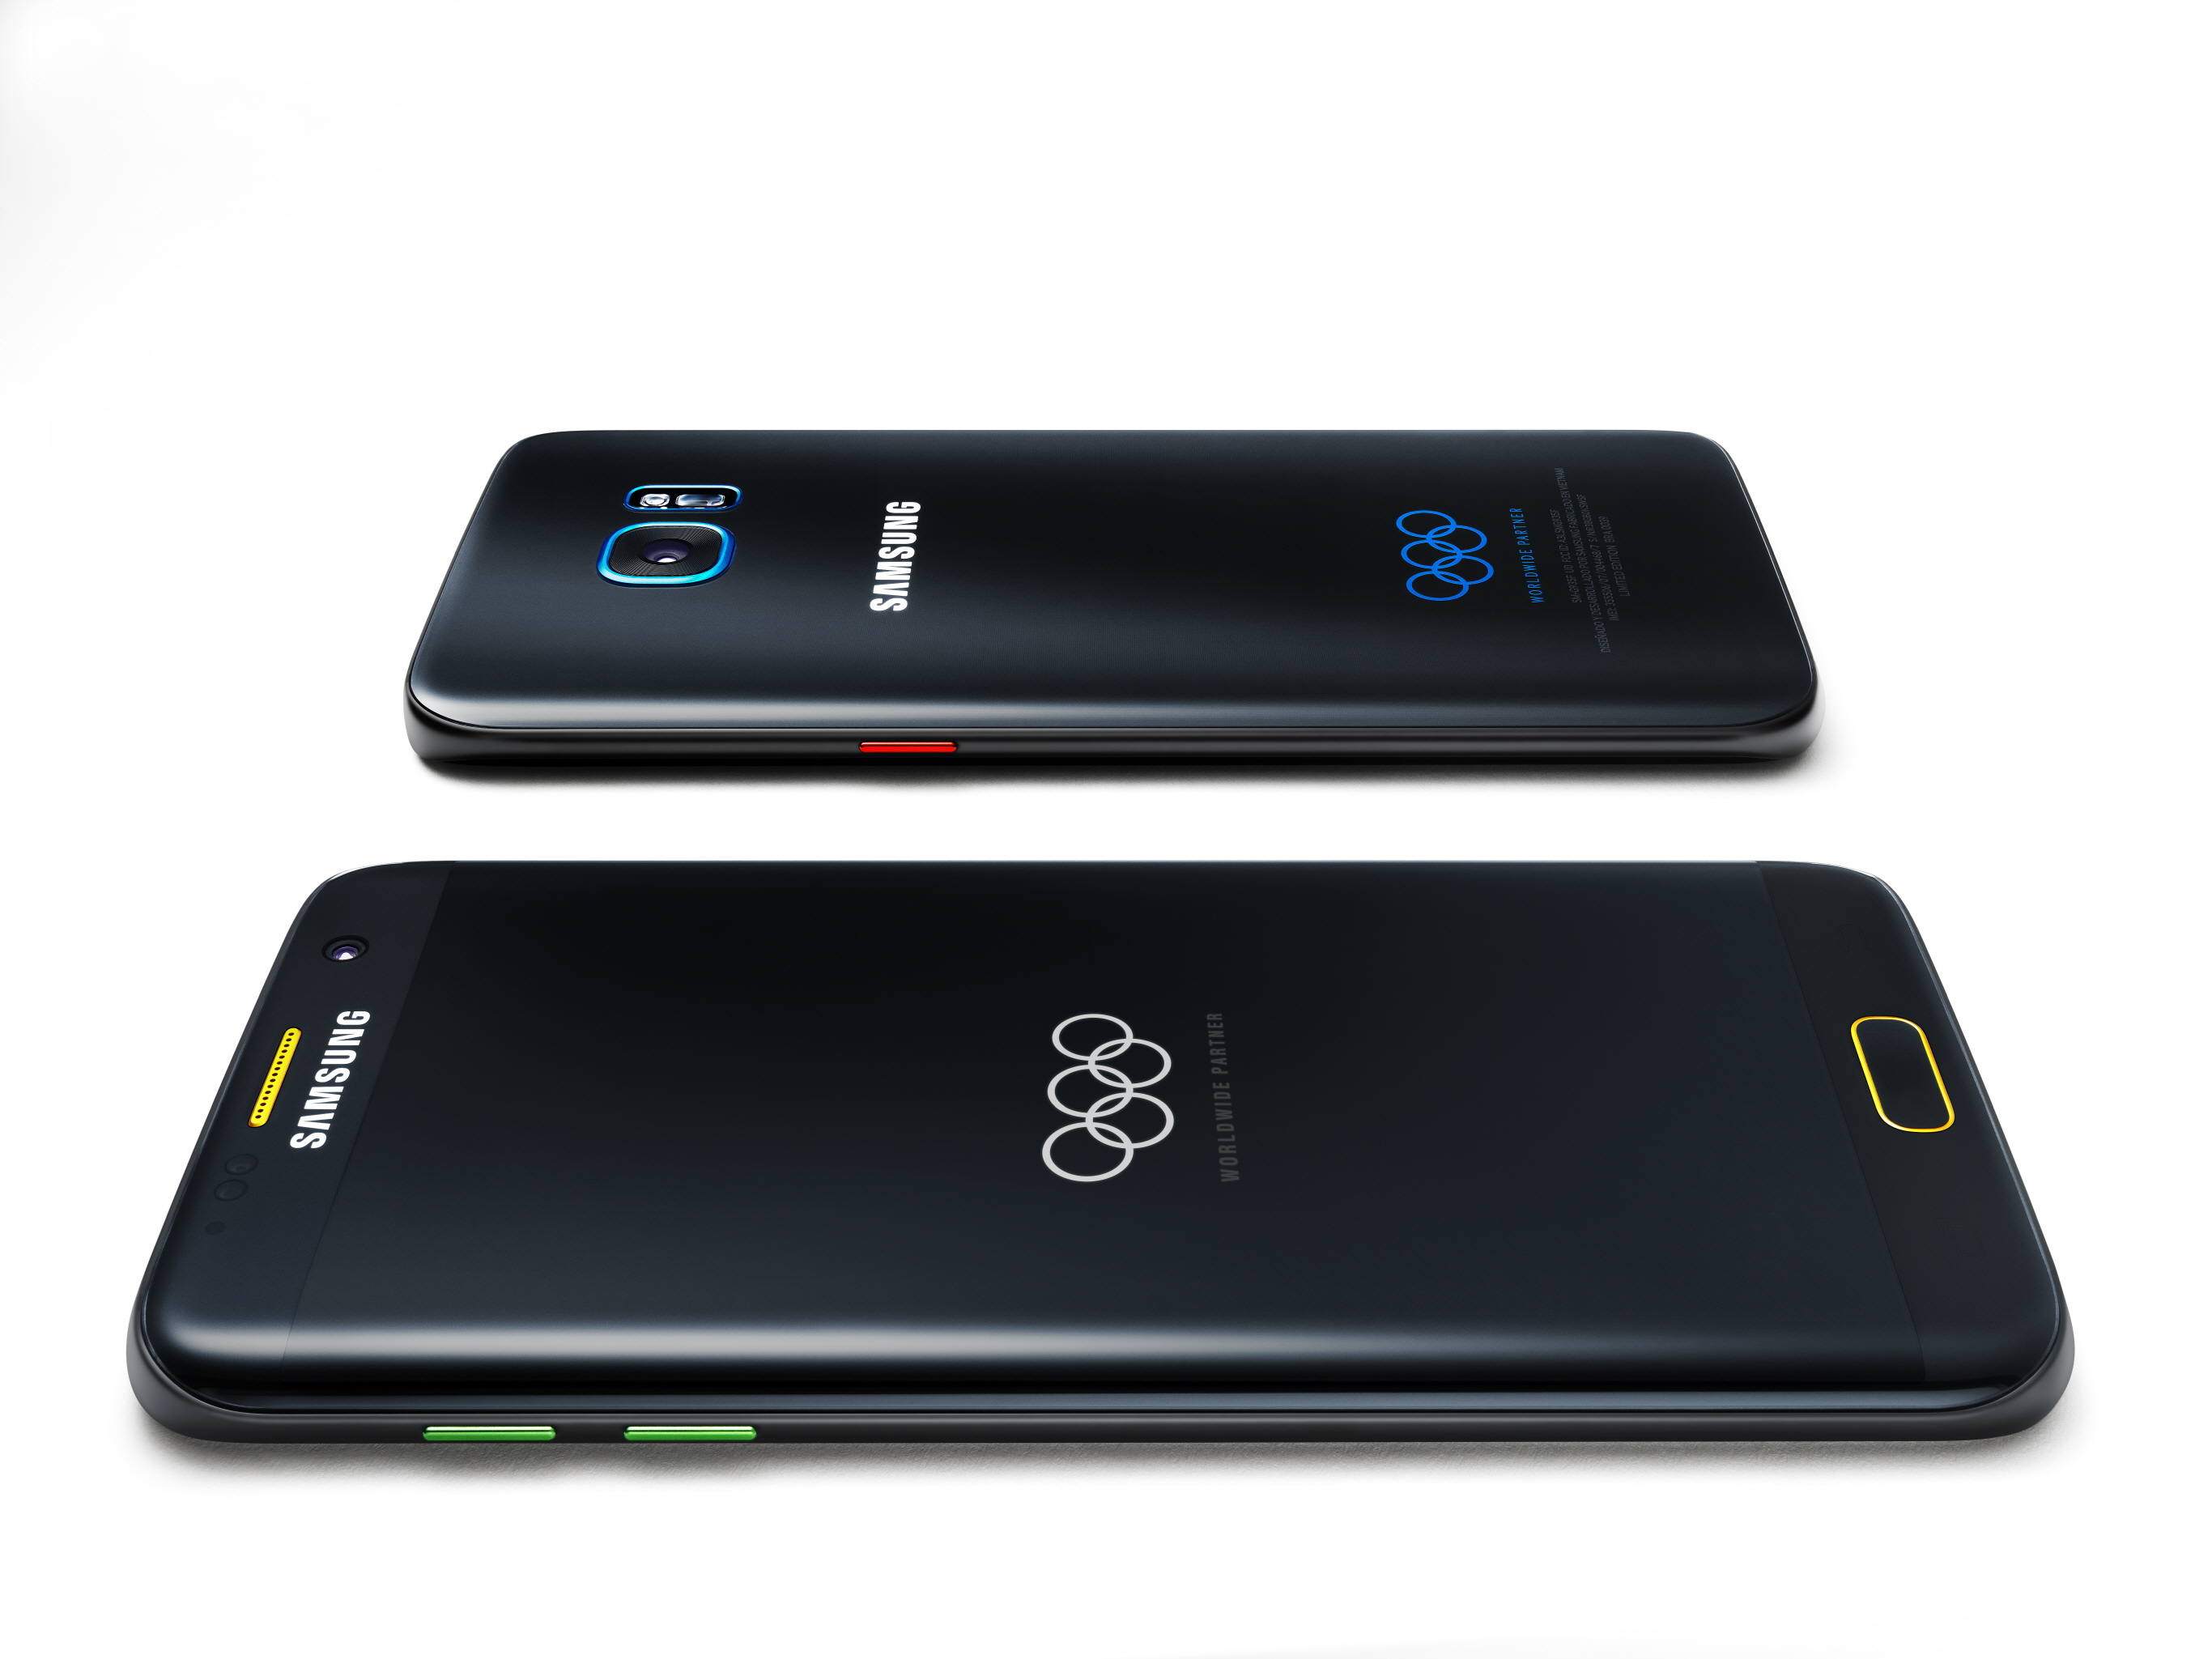 Samsung Announces Galaxy S7 edge Olympic Games Limited Edition with Launch  of Global Rio 2016 Olympic Games Campaign - Samsung Newsroom Global Media  Library